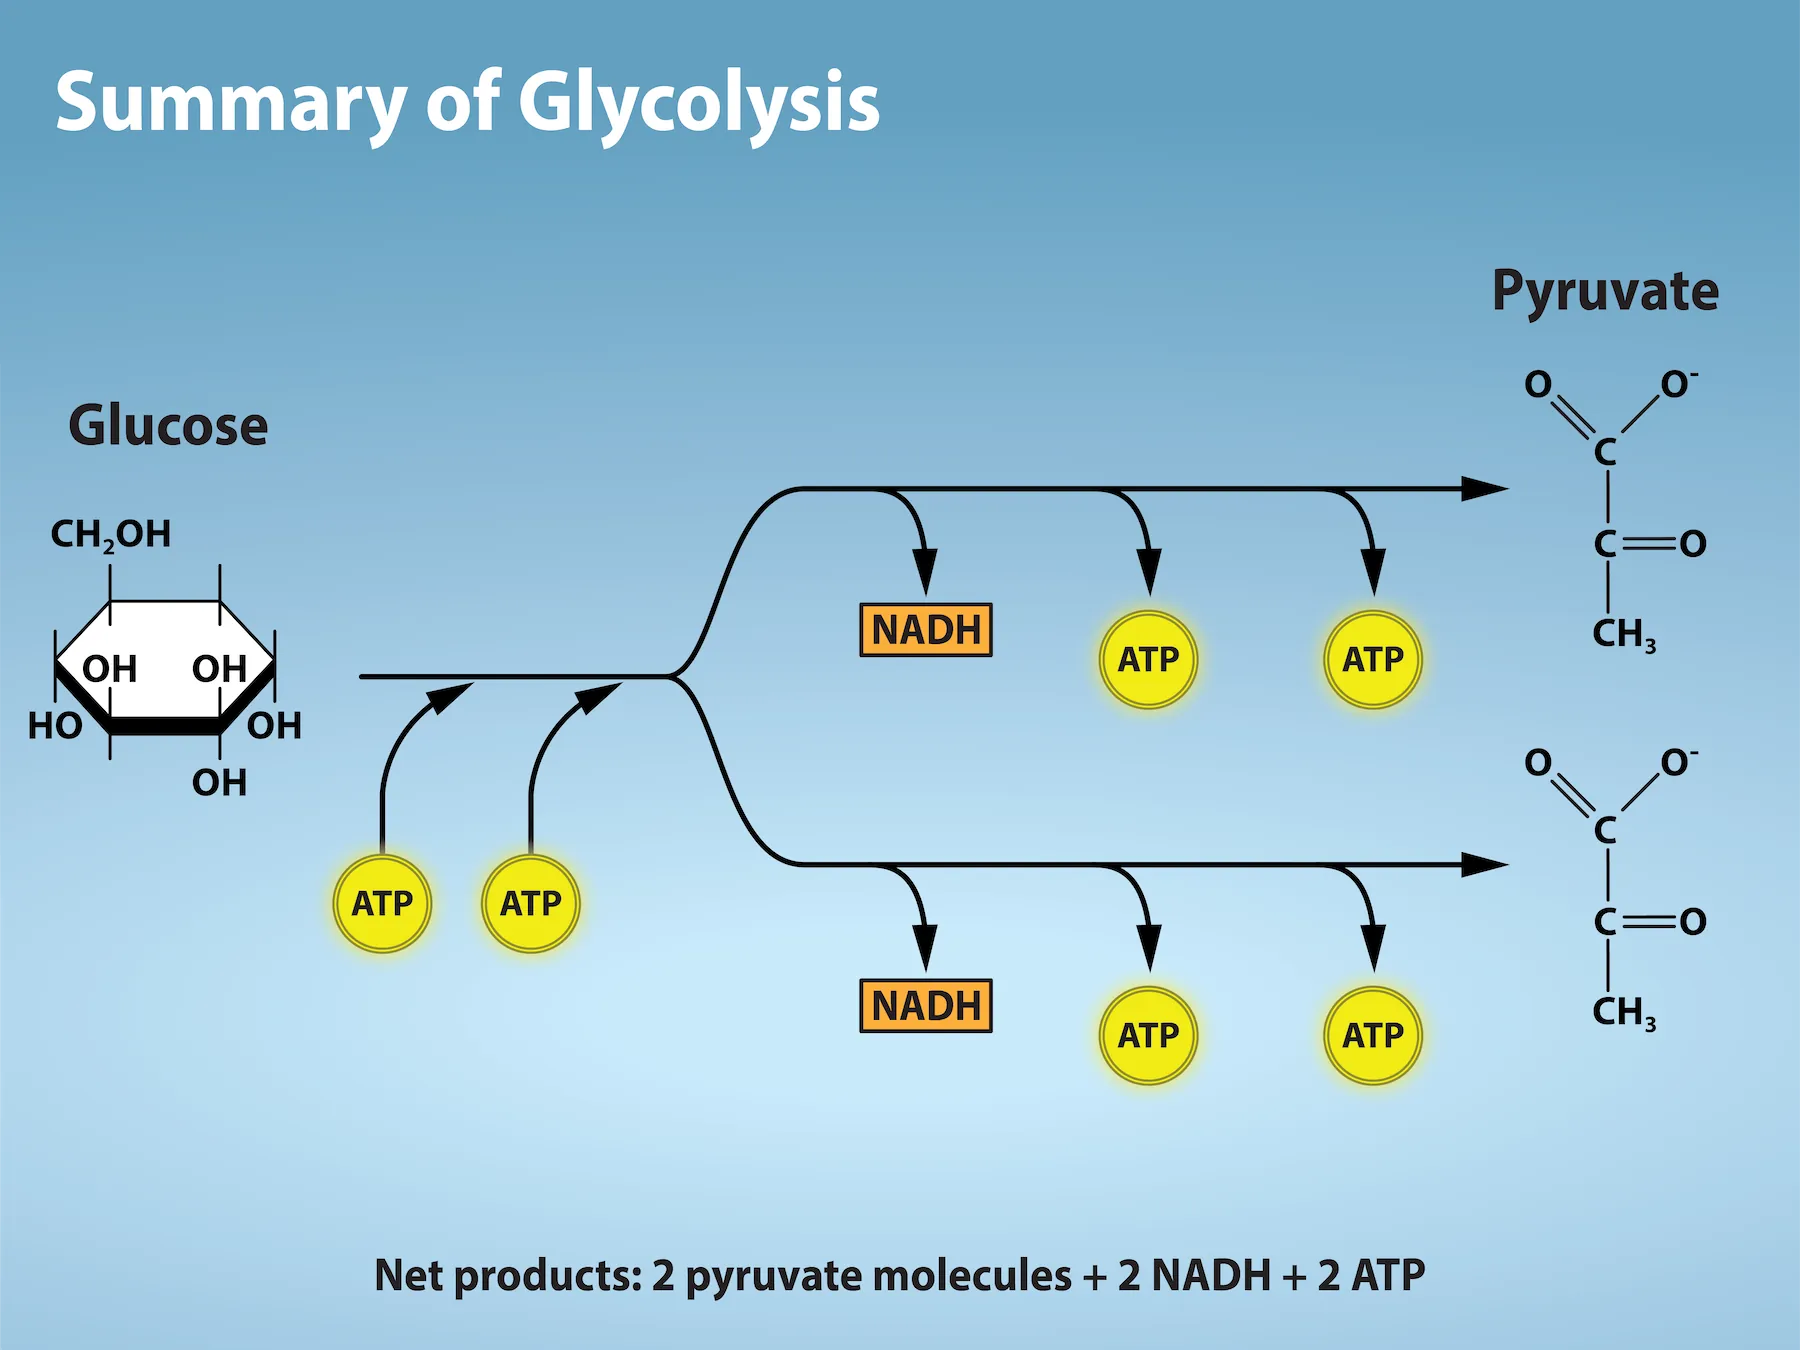 The illustration shows a simplified process of glucose moving through the stages of glycolysis. First two A T P are added, then the glucose is split into two branches, with N A D H and two A T P being released.  The net products are 2 pyruvate molecules and 2 N A D H and 2 A T P molecules. 